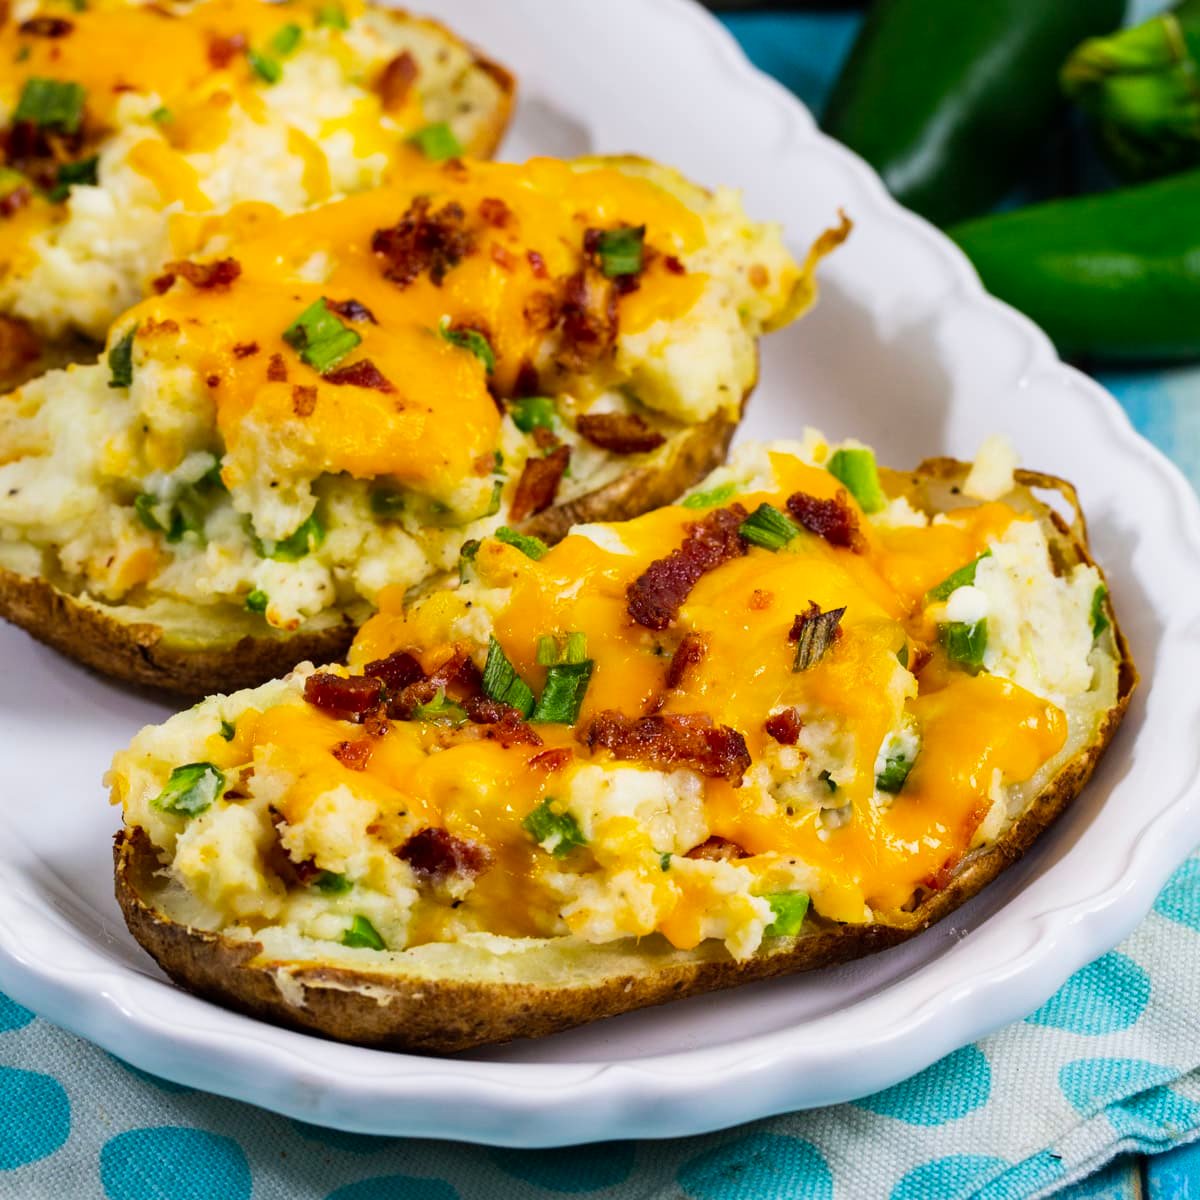 Twice Baked Jalapeno Popper Potatoes on serving plate.